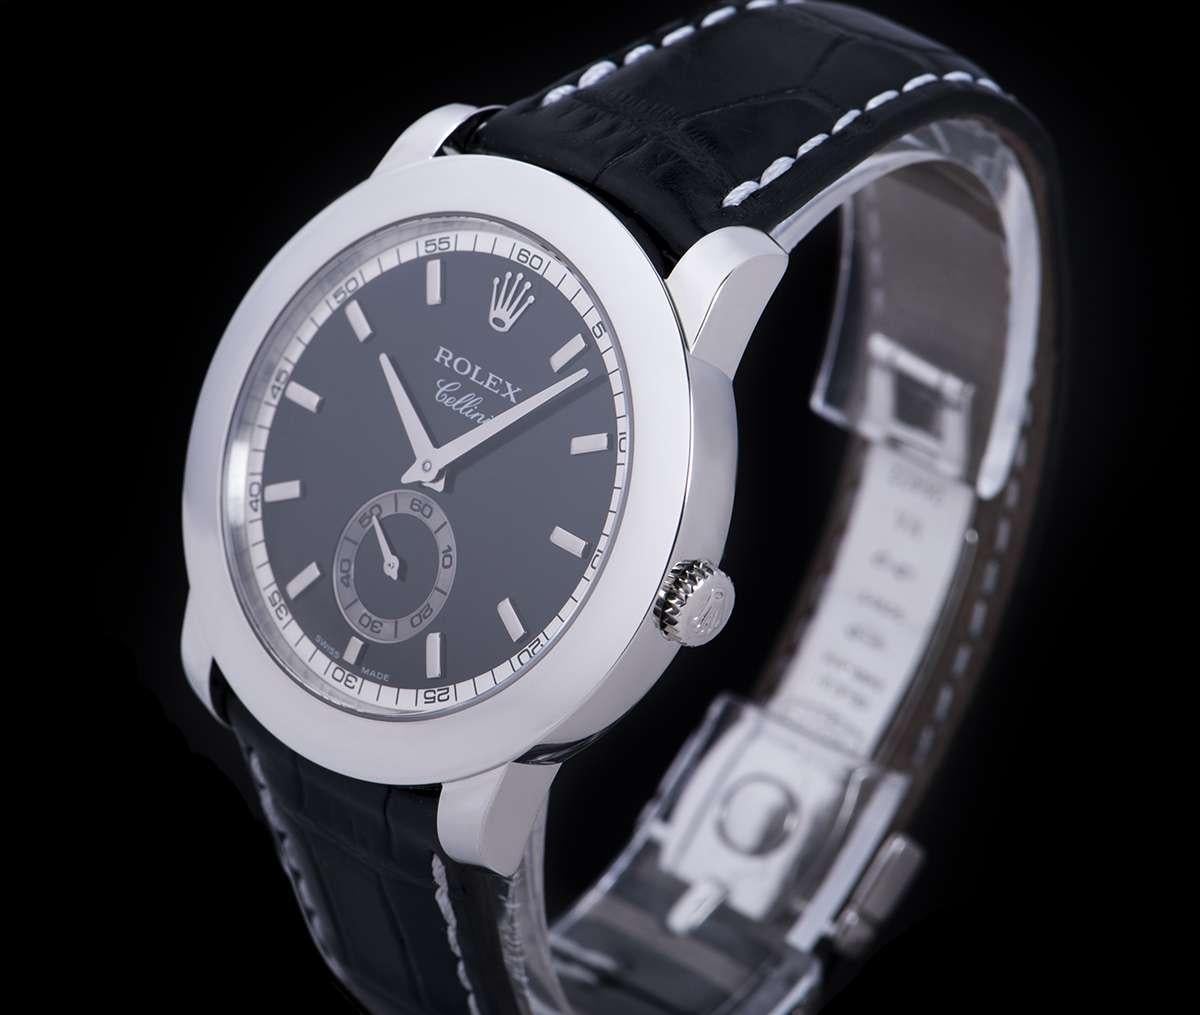 A Platinum Cellini Gents Wristwatch, black dial with applied hour markers, small seconds at 6 0'clock, a fixed platinum bezel, an original black leather strap with an original platinum pin buckle, sapphire glass, manual wind movement, in excellent